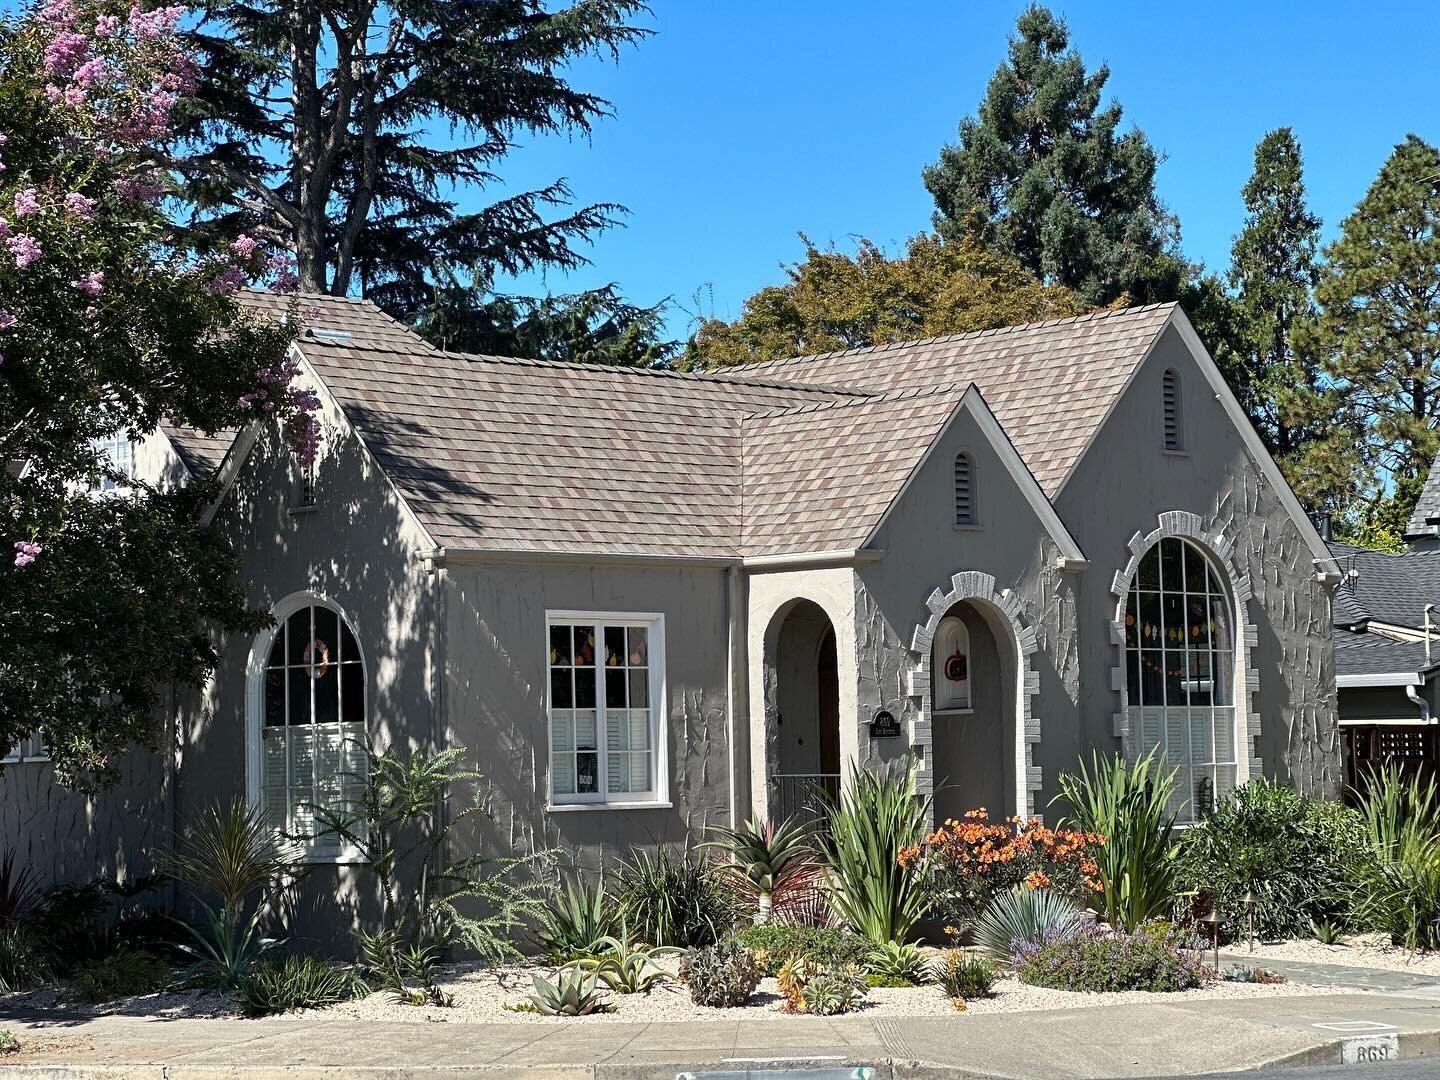 Lee Avenue 🌳 San Leandro, California. We brought this stunning Tudor home into the twenty first century with a killer Farallon garden, drip irrigation system and low voltage landscape lighting. Farallon Gardens is making San Leandro cool again! Now 